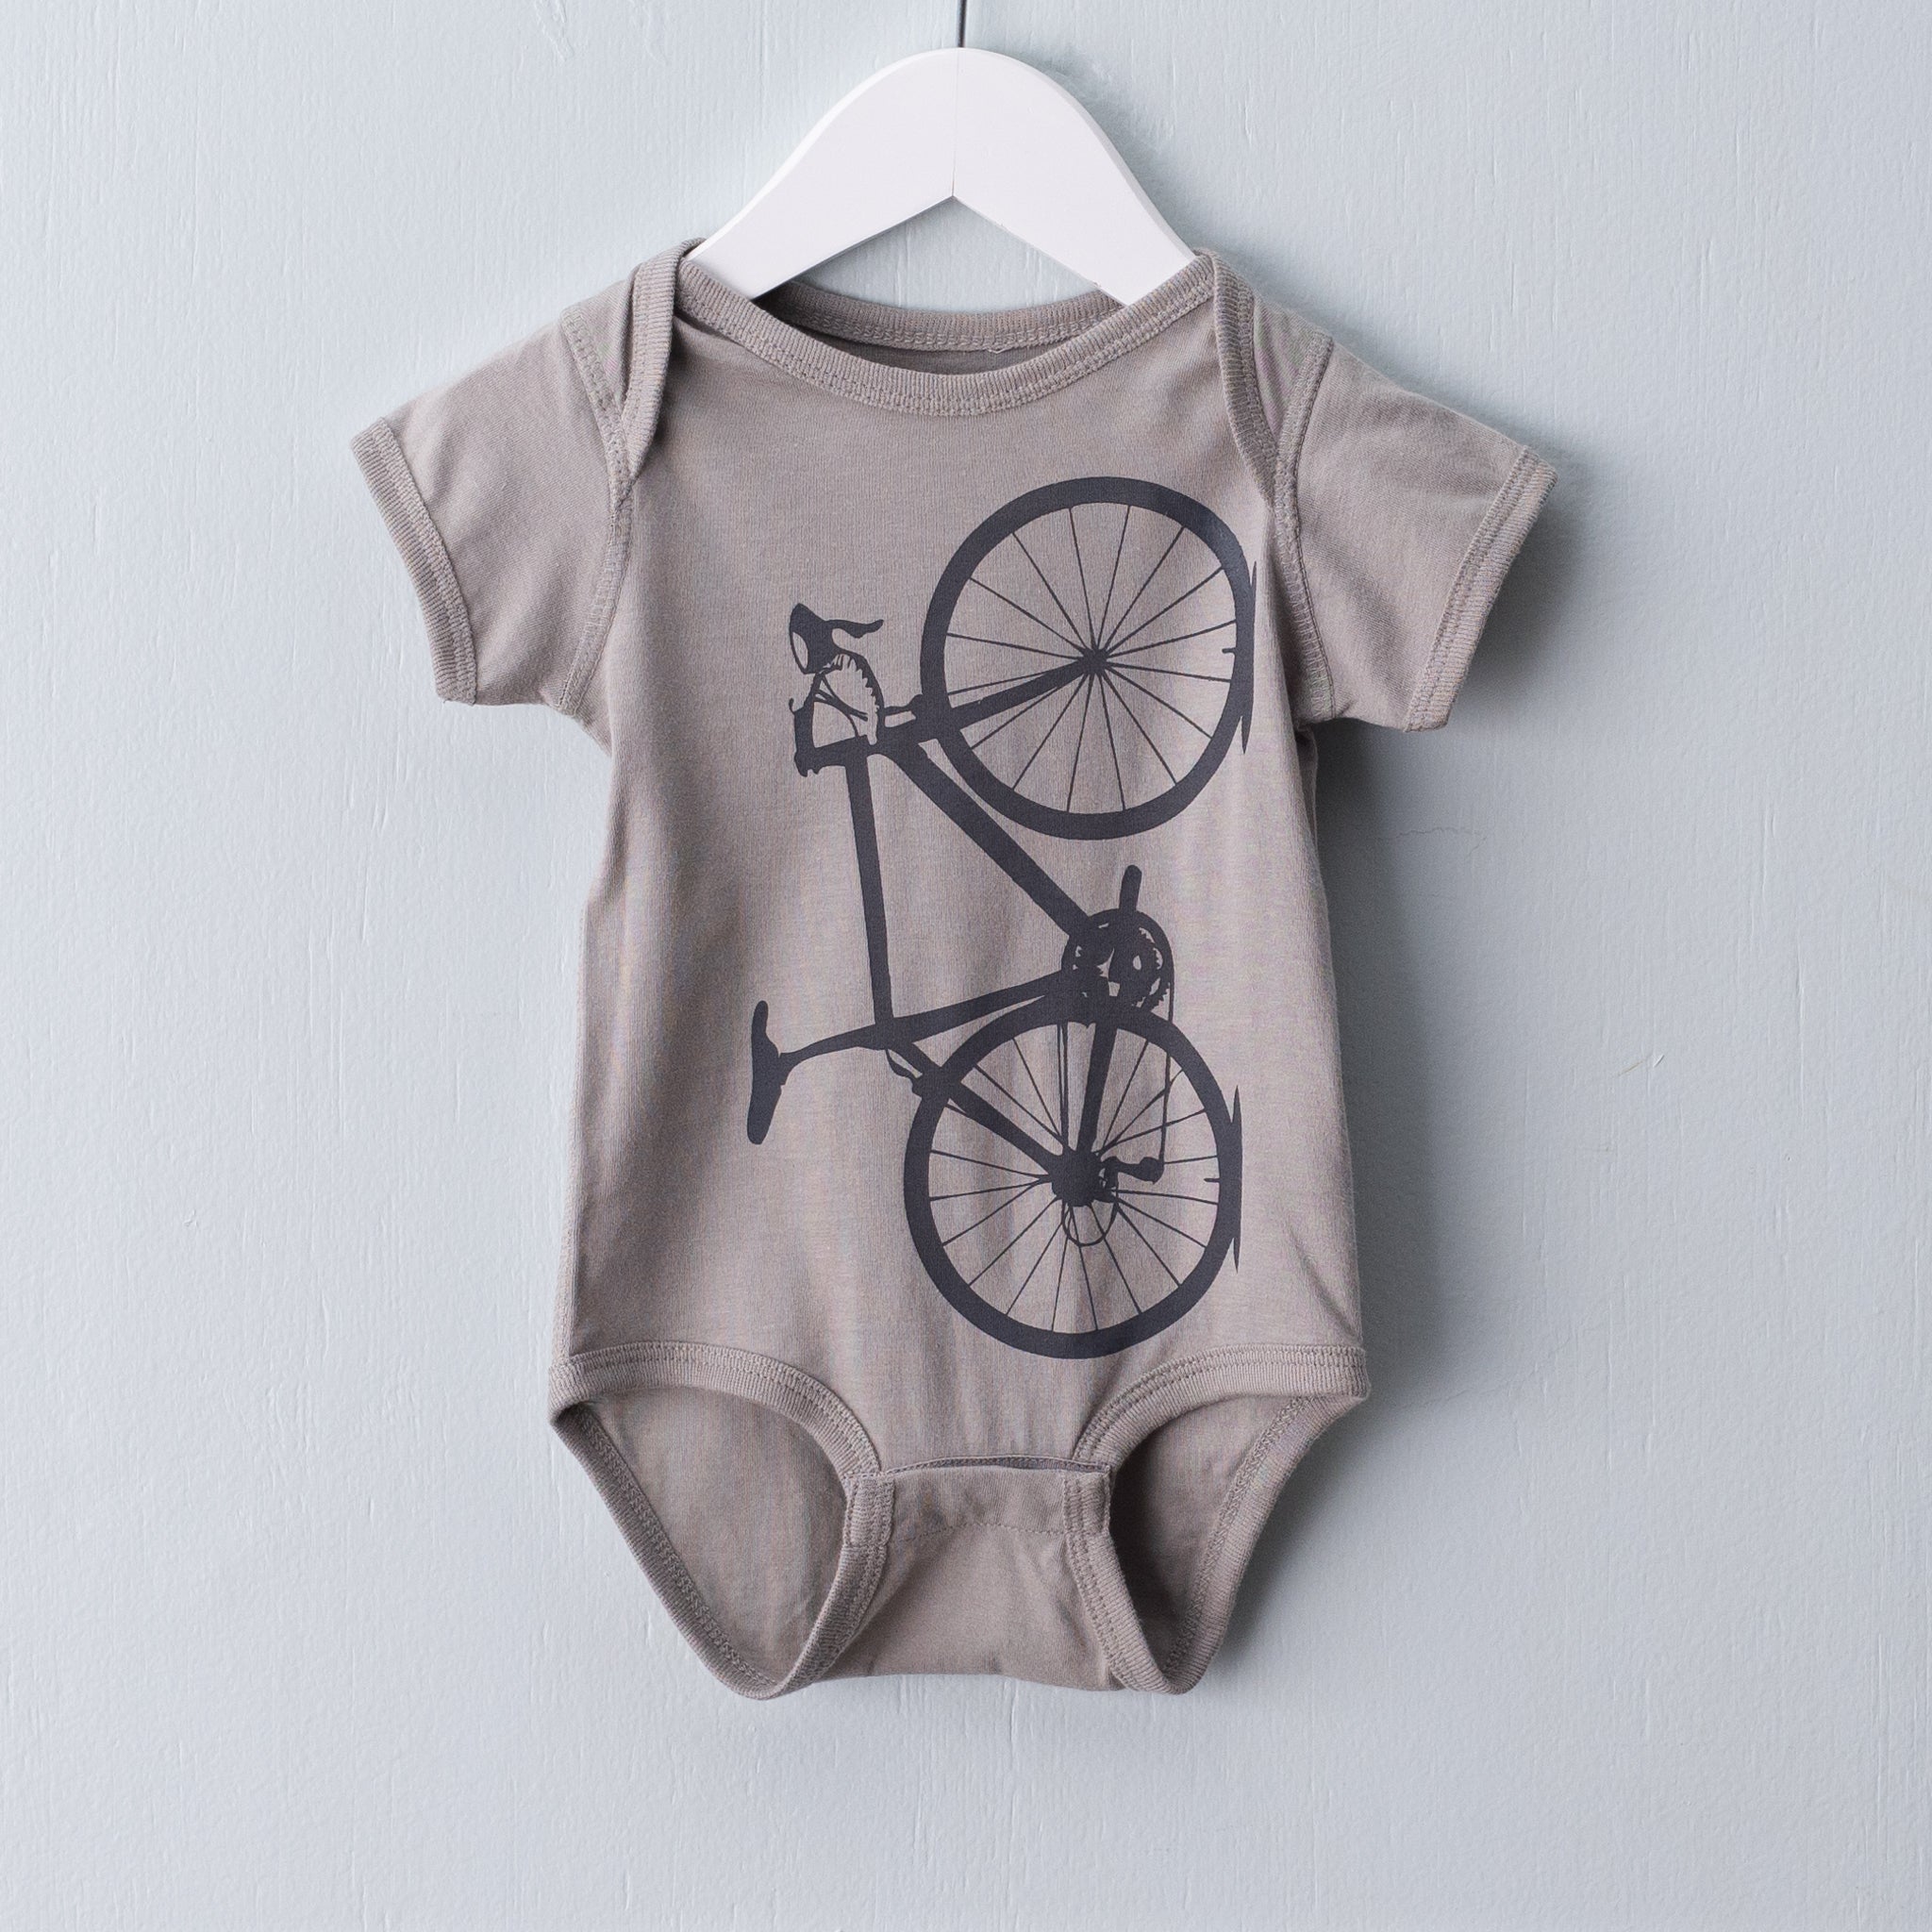 Titanium grey infant one piece screen printed with a warm grey tone bicycle